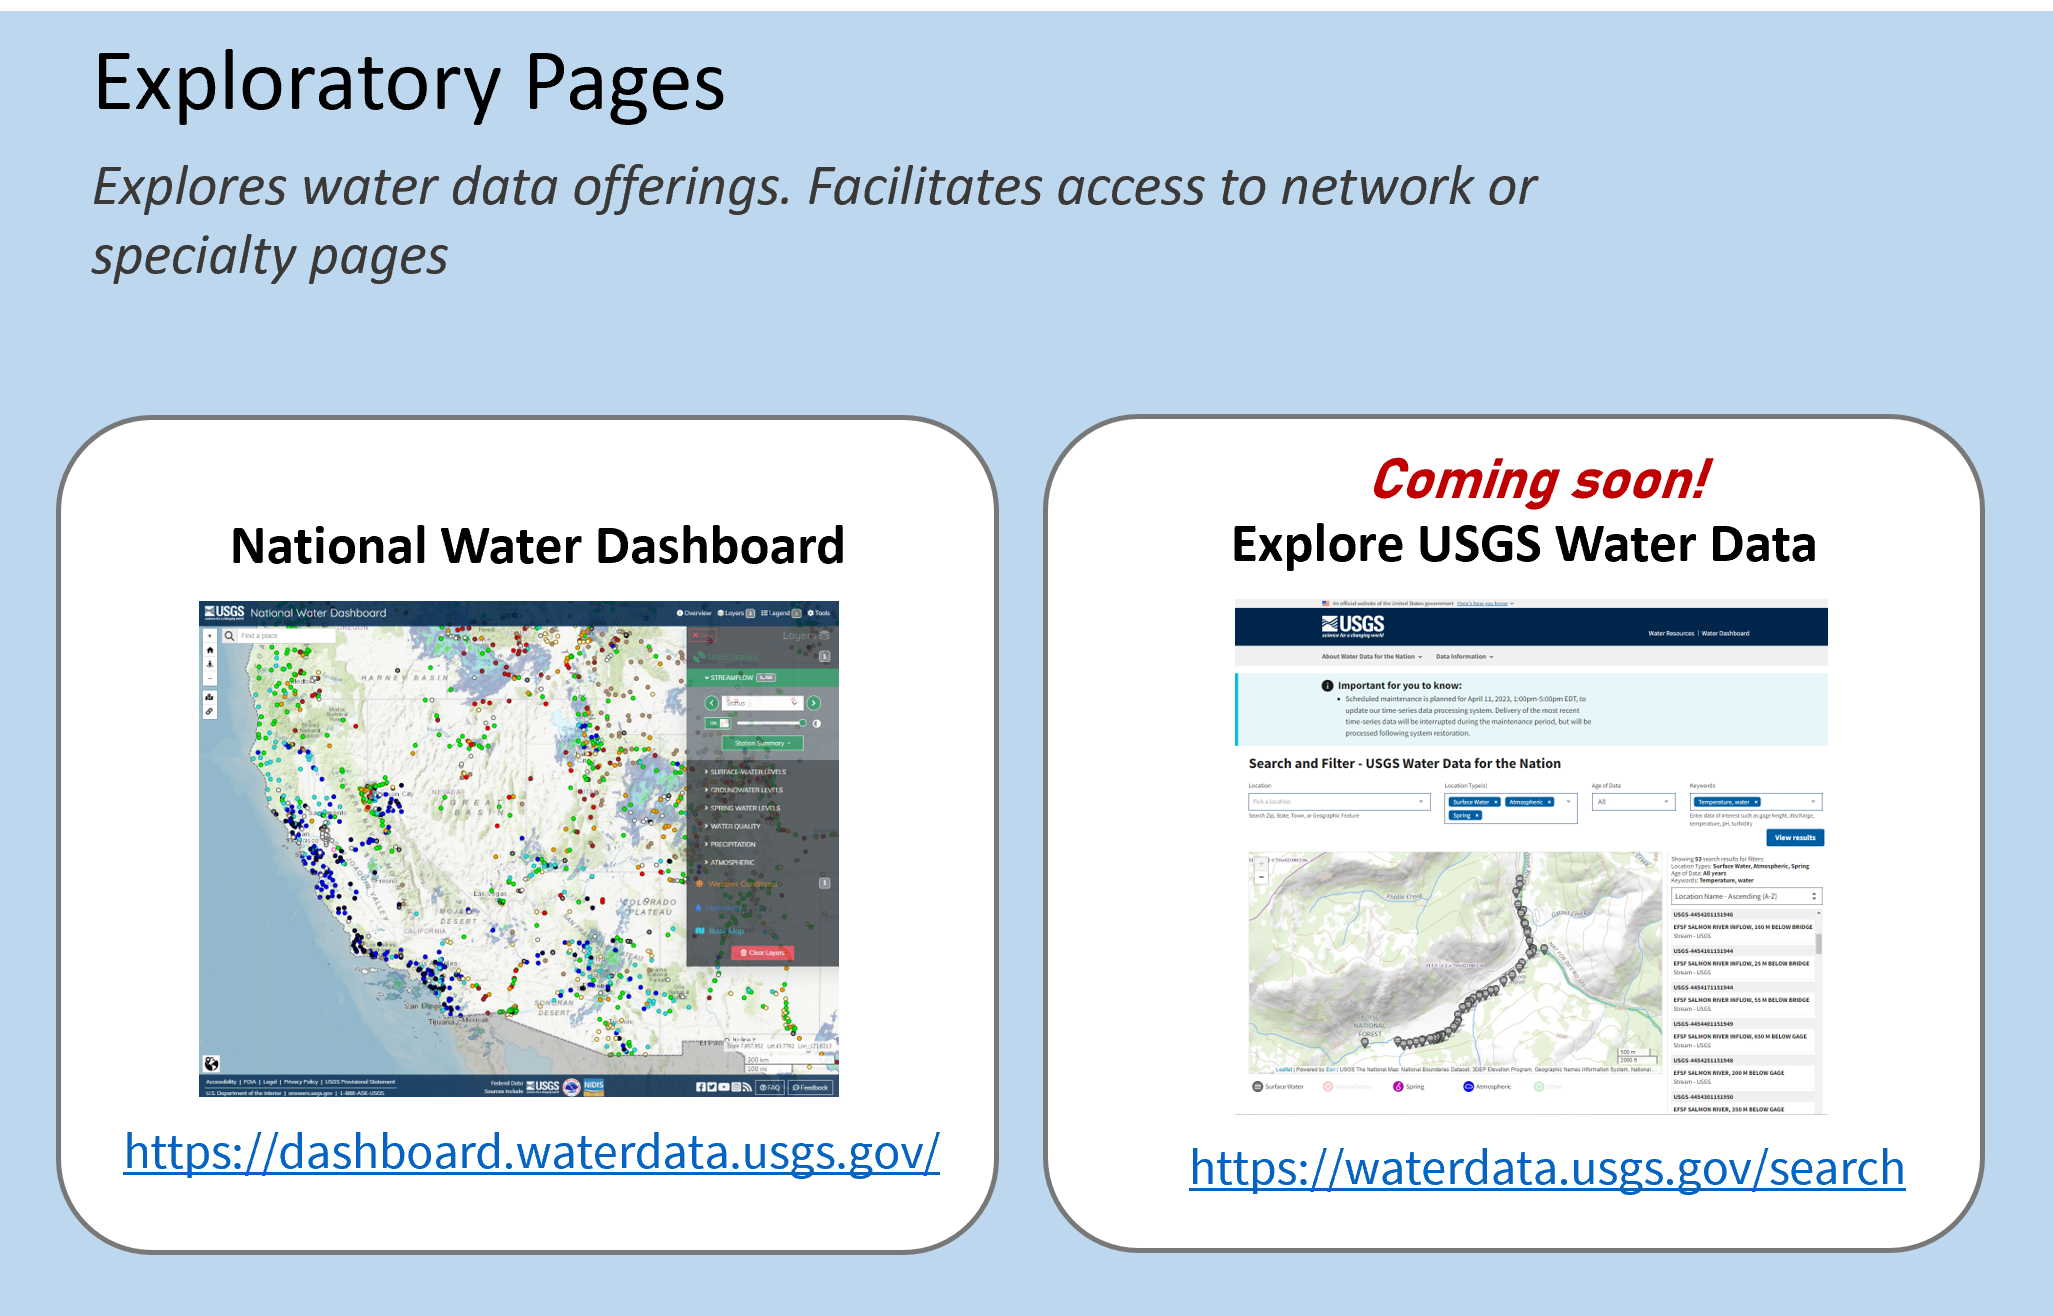 A graphic describing Exploratory Pages which includes the National Water Dashboard at https://dashboard.waterdata.usgs.gov/ and the Explore USGS Water Data which is coming soon at https://waterdata.usgs.gov/search.